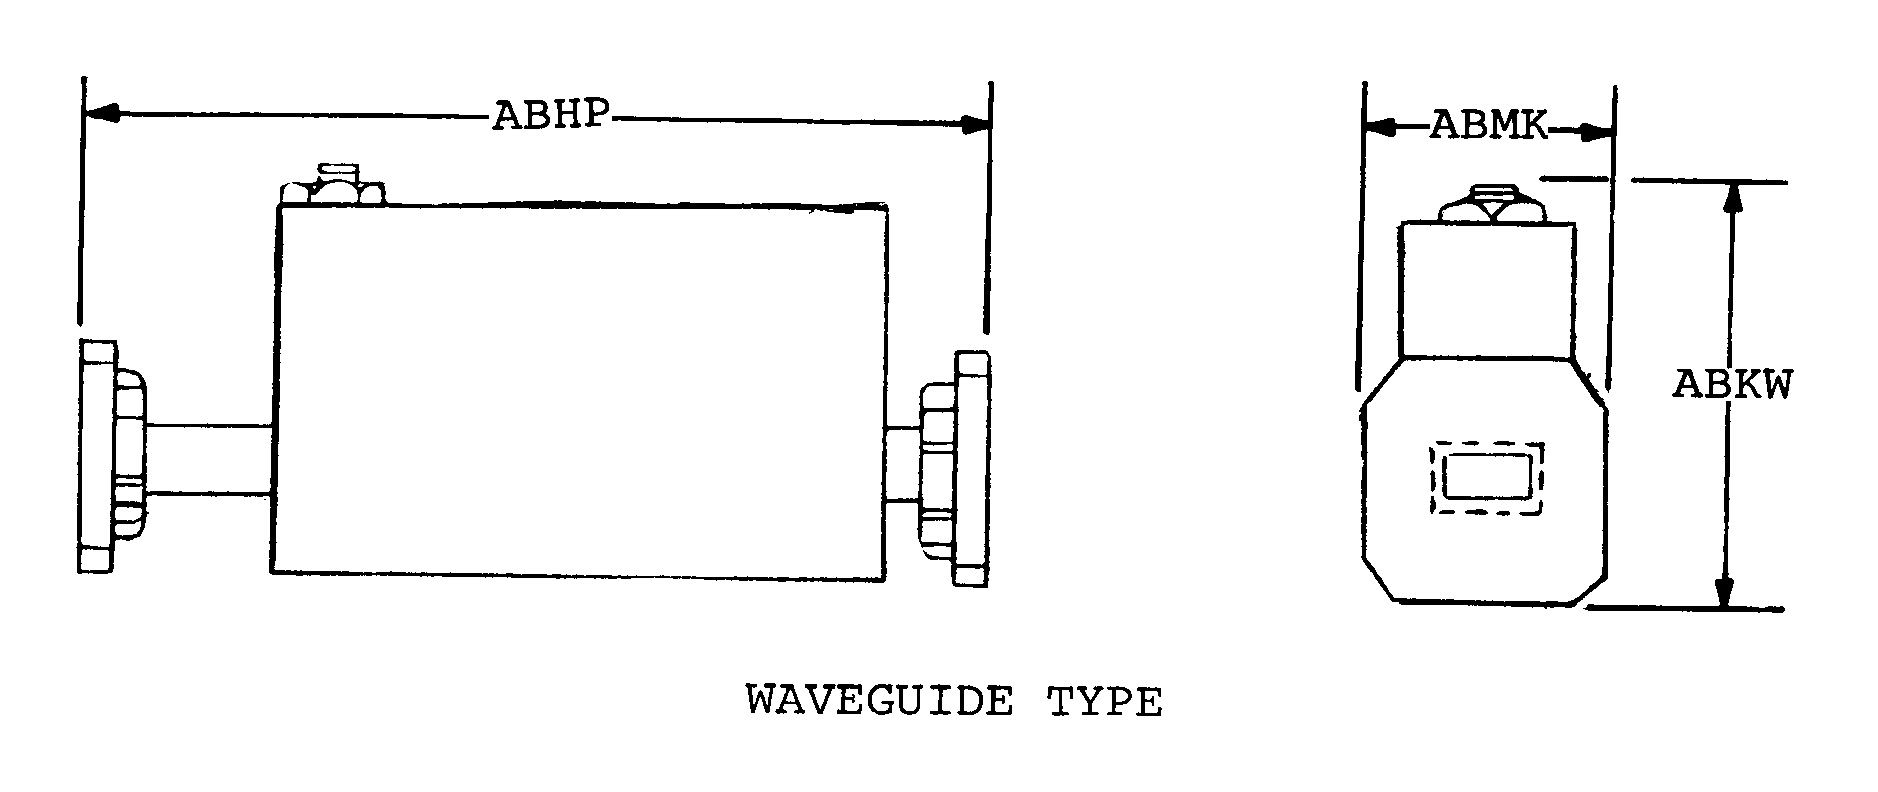 WAVEGUIDE TYPE style nsn 5985-00-500-8475